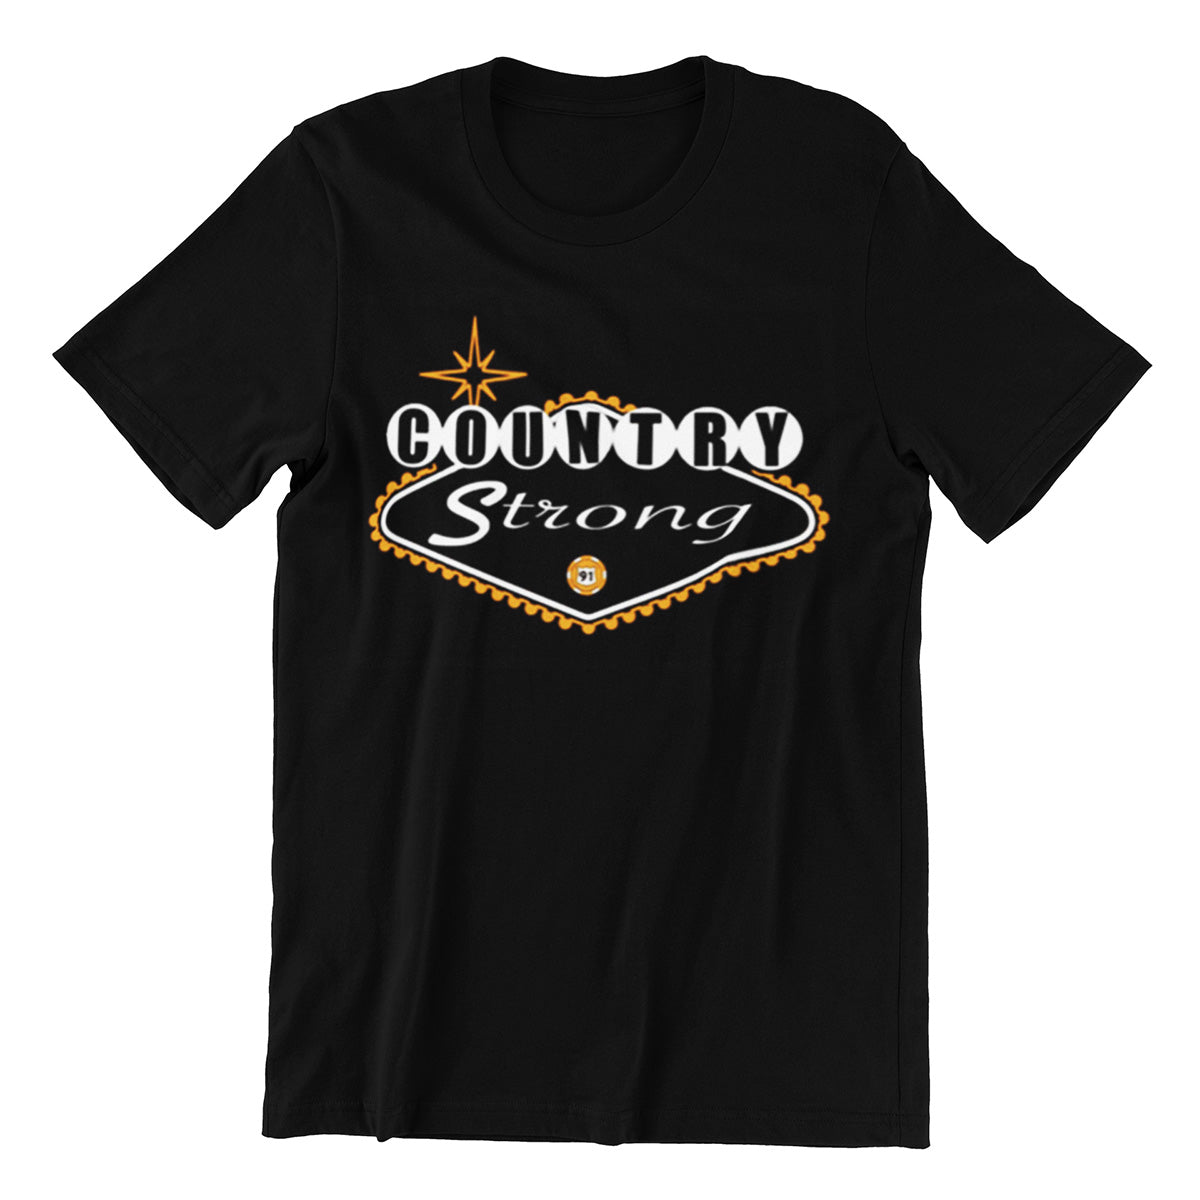 COUNTRY STRONG LAS VEGAS ROUTE 91 T SHIRT + free gift - Trailsclothing.com